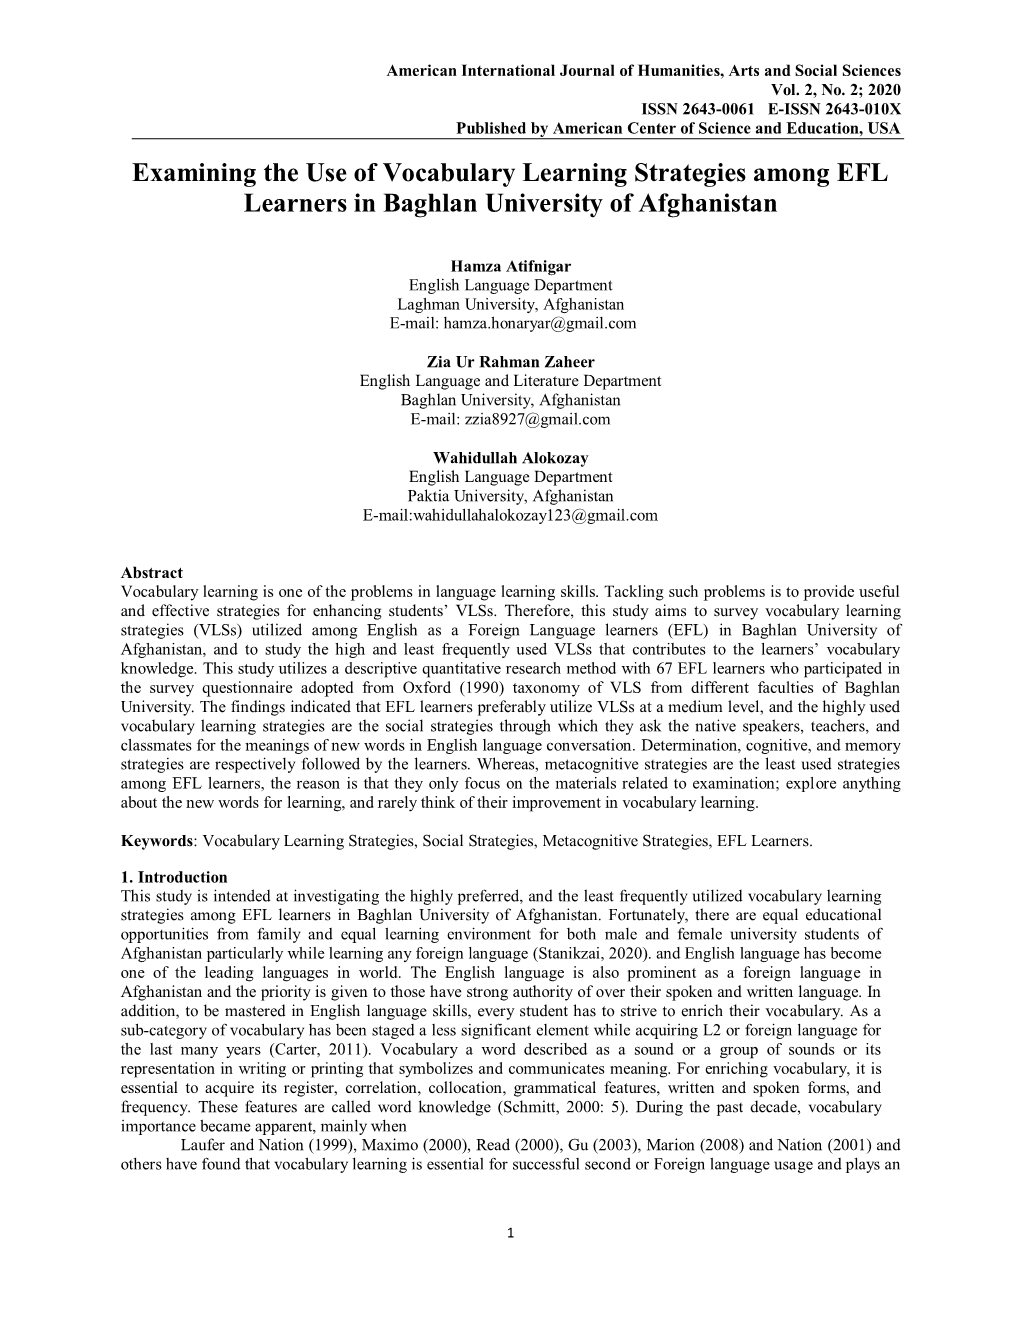 Examining the Use of Vocabulary Learning Strategies Among EFL Learners in Baghlan University of Afghanistan